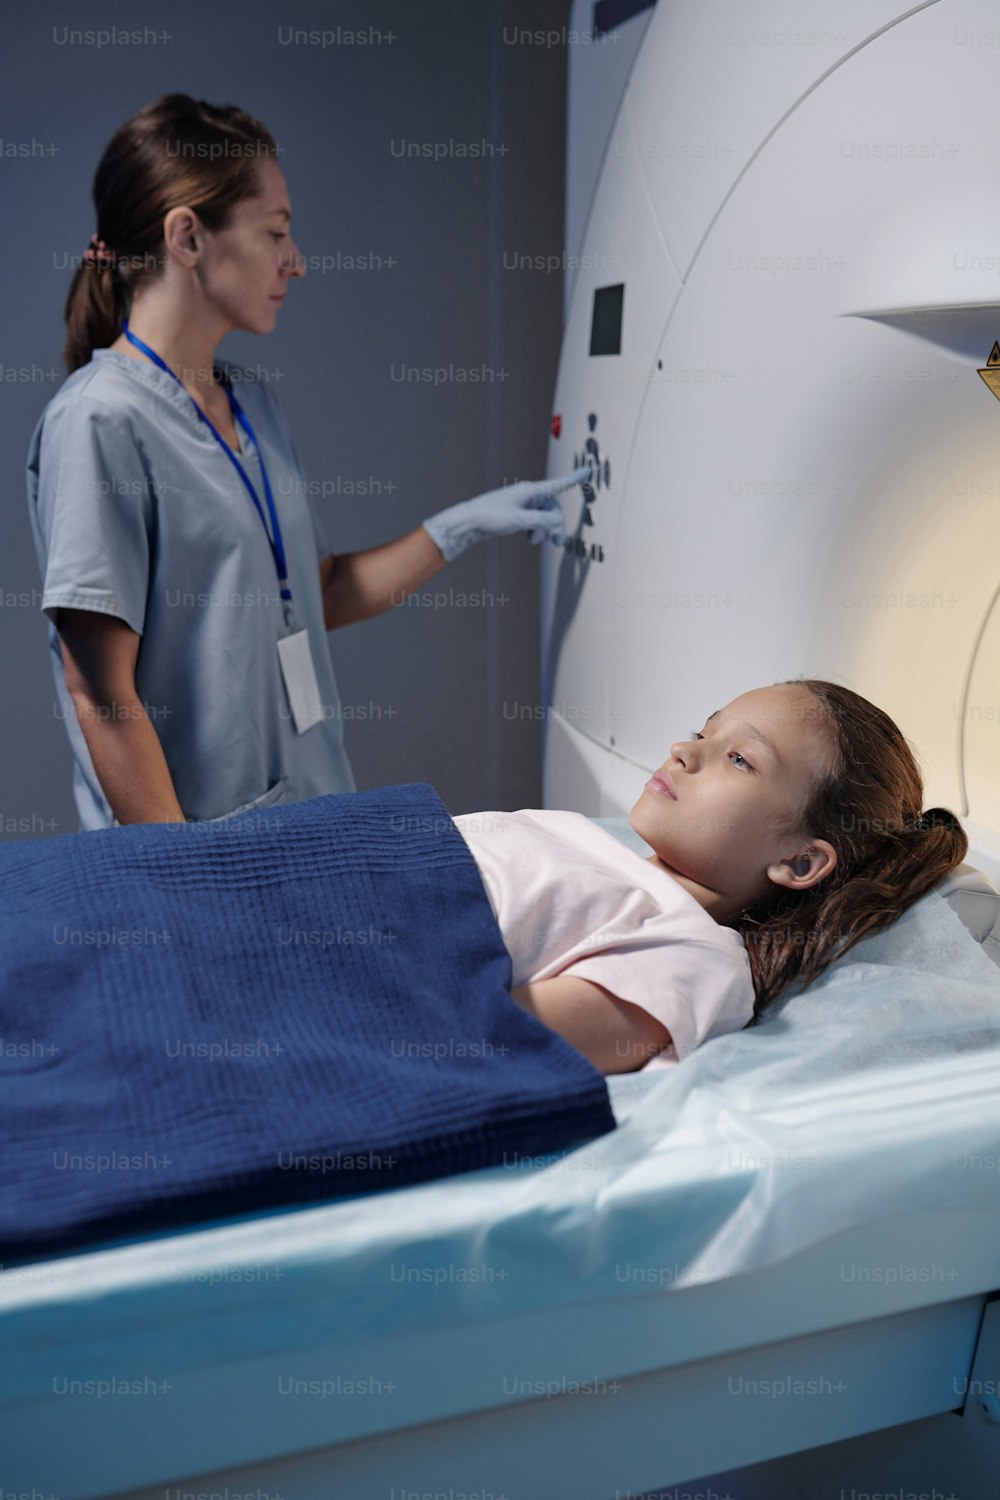 Female doctor pushing button on control panel while little patient undergoing mri scan examination